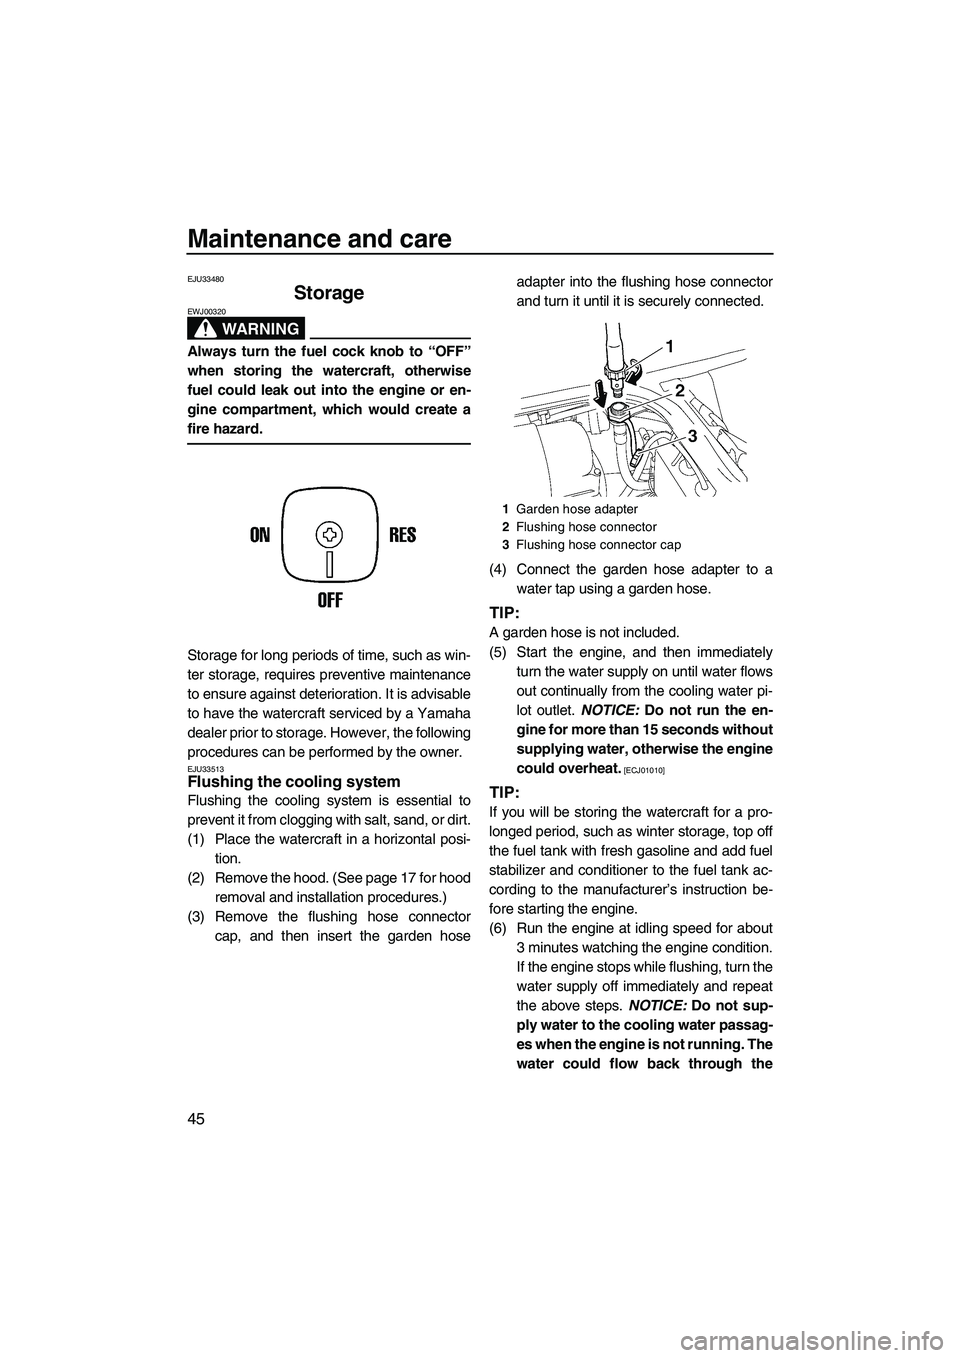 YAMAHA SUPERJET 2009  Owners Manual Maintenance and care
45
EJU33480
Storage 
WARNING
EWJ00320
Always turn the fuel cock knob to “OFF”
when storing the watercraft, otherwise
fuel could leak out into the engine or en-
gine compartmen